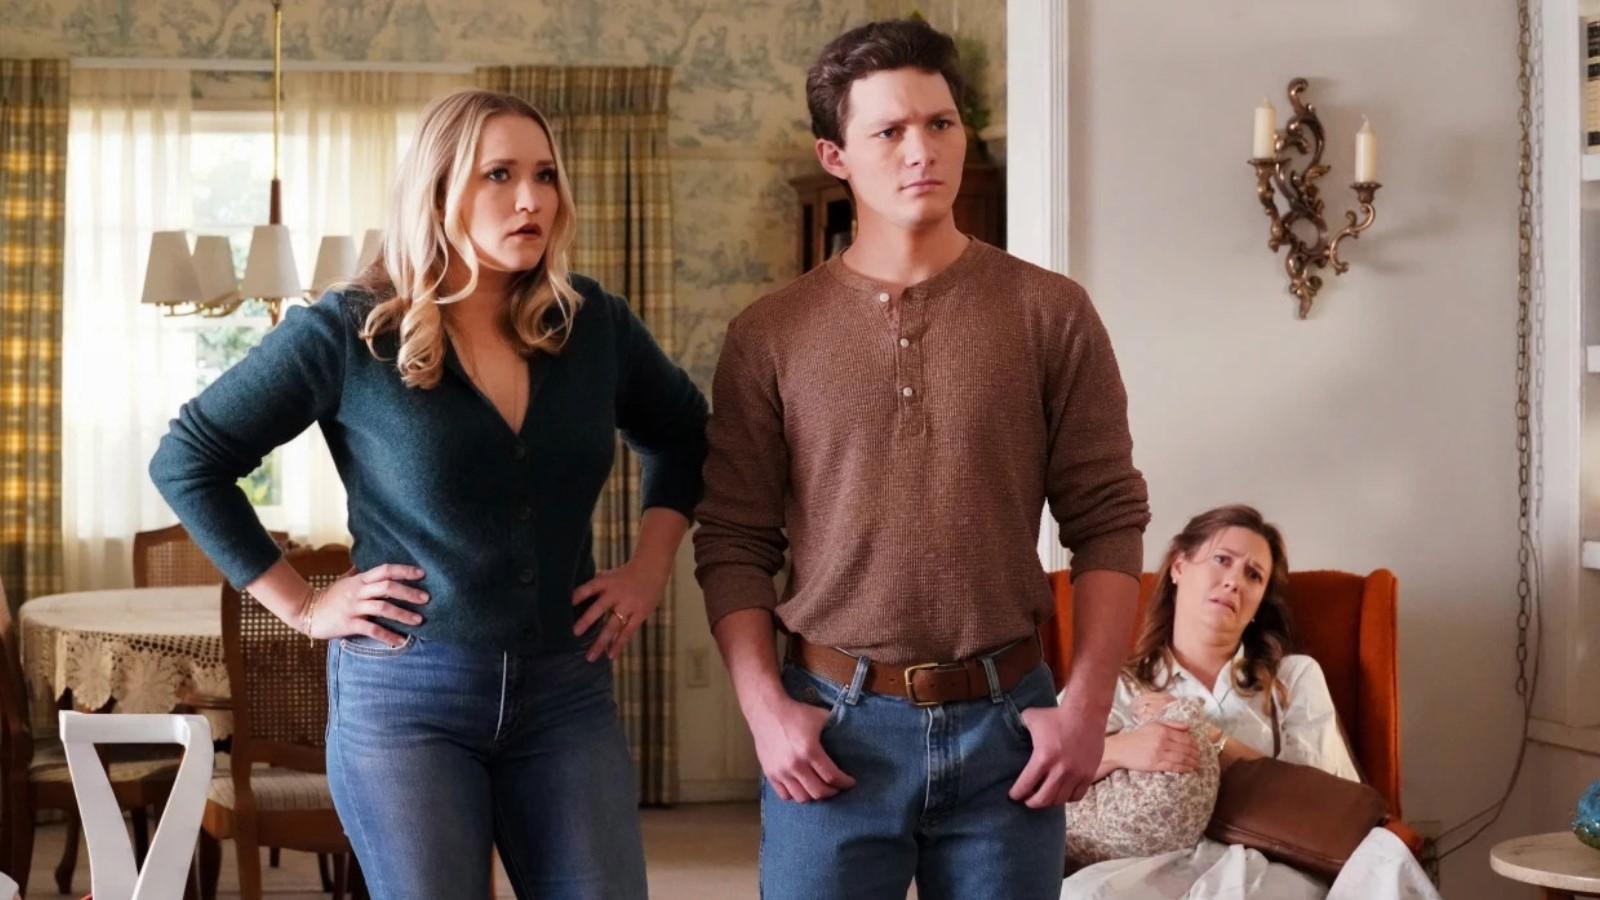 Emily Osment and Montana Jordan as Mandy and Georgie, standing up in the living room in Young Sheldon